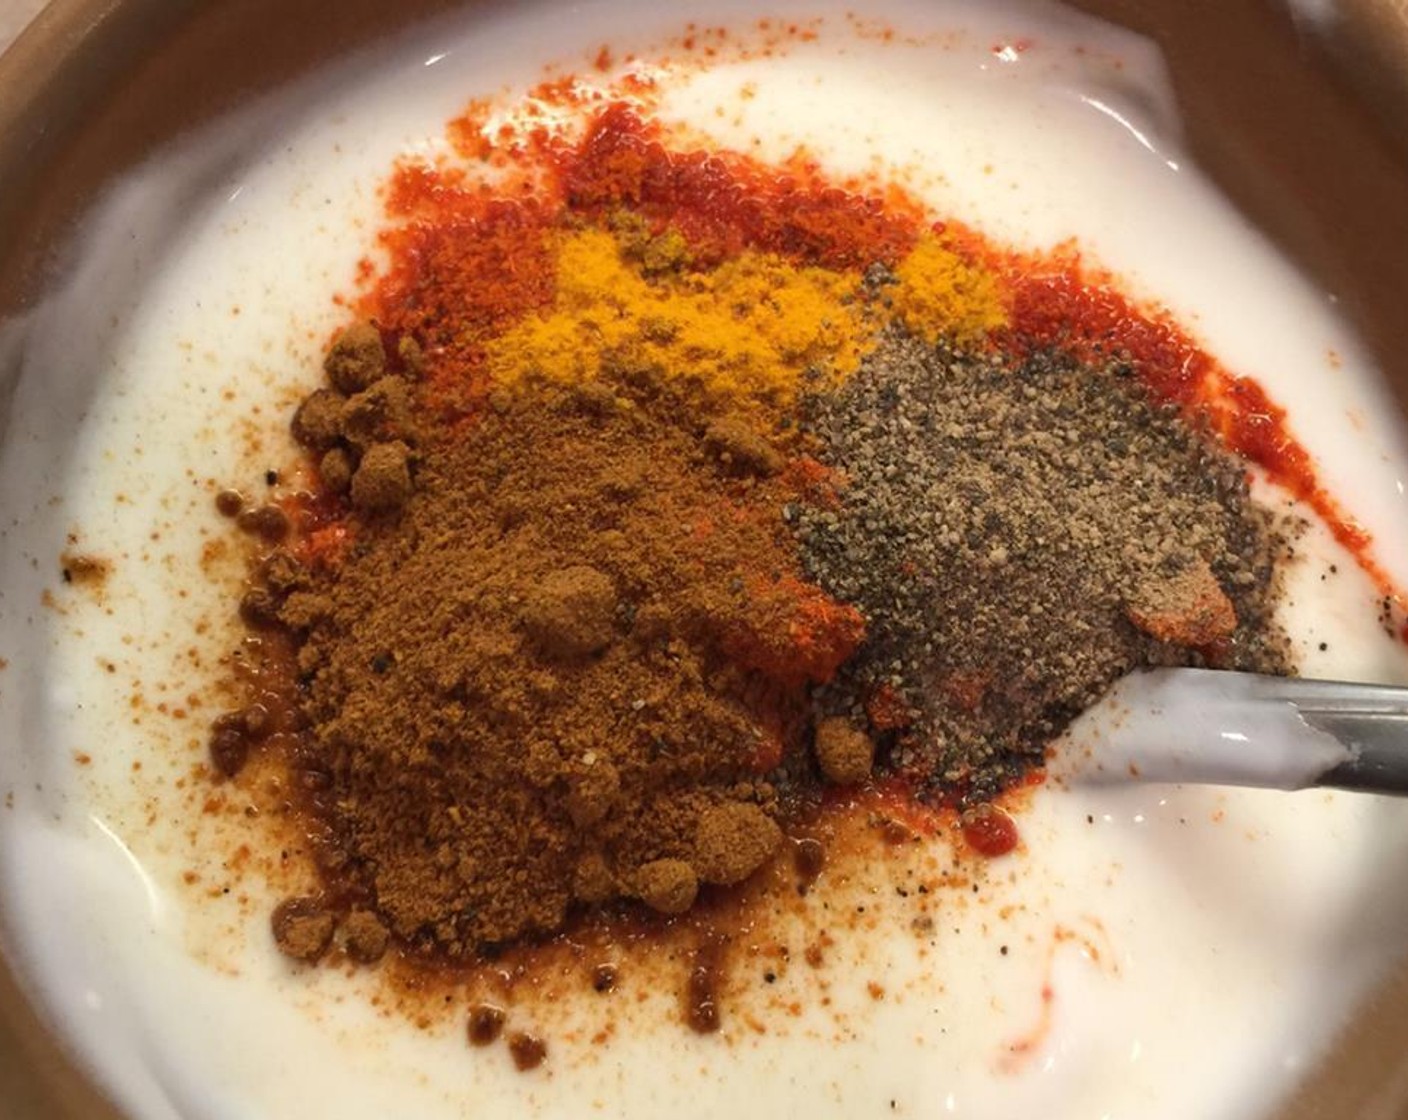 step 1 In a bowl, whip Yogurt (1 cup) properly without forming lumps. Add Ginger Garlic Paste (1 tsp), Red Chili Powder (2 Tbsp), Ground Turmeric (1 pinch), Garam Masala (1 tsp), Salt (1 Tbsp) and Ground Black Pepper (1 Tbsp). Mix well.